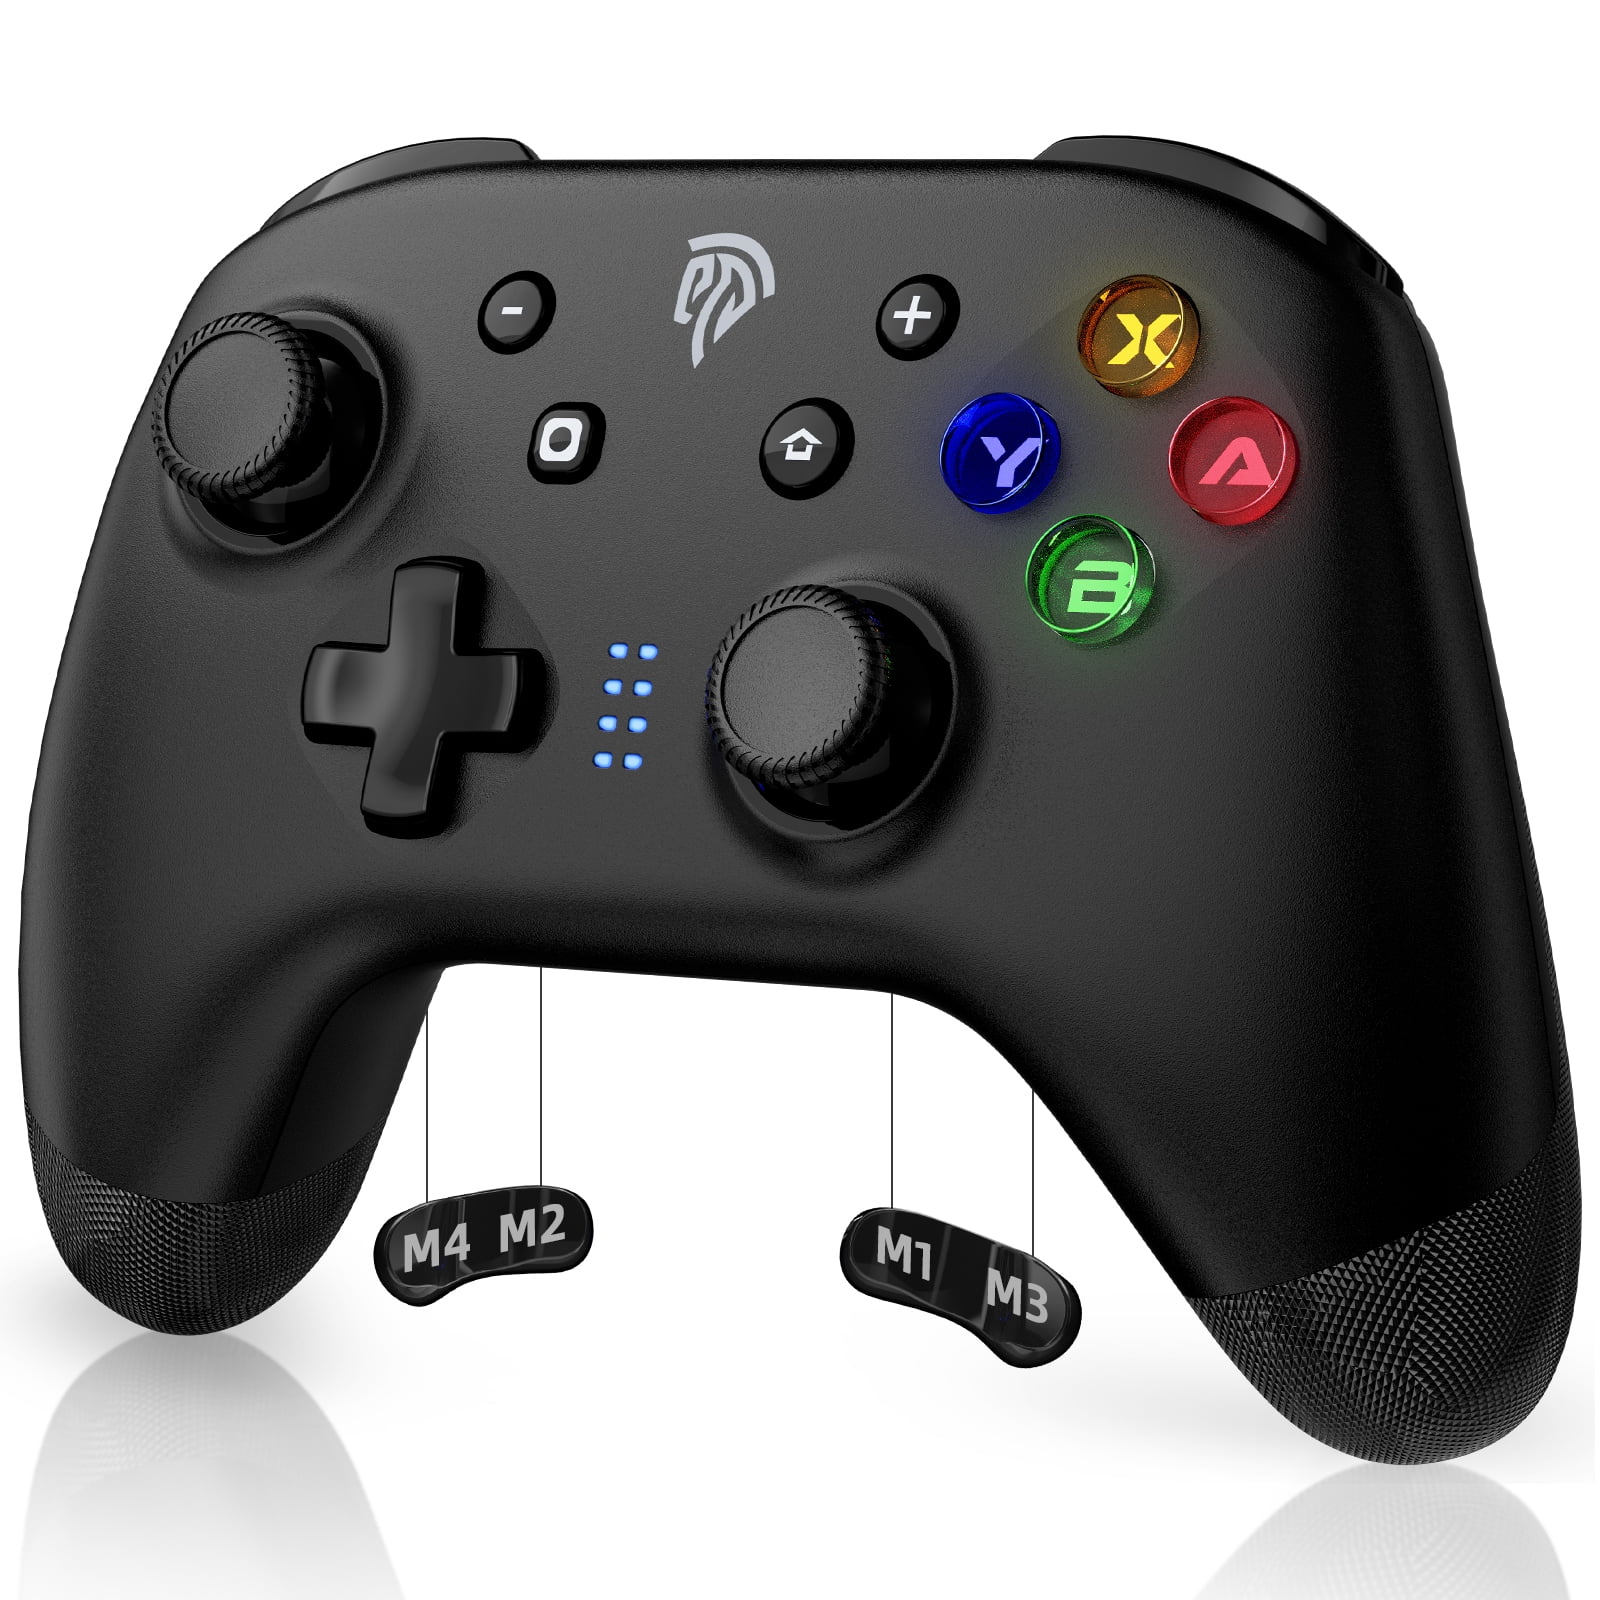 EasySMX Switch Pro Controller for Nintendo Switch/Lite/ OLED, PC, with 4 Programmable Buttons, Motion Control, Wake-up, Vibration, Black - Walmart.com